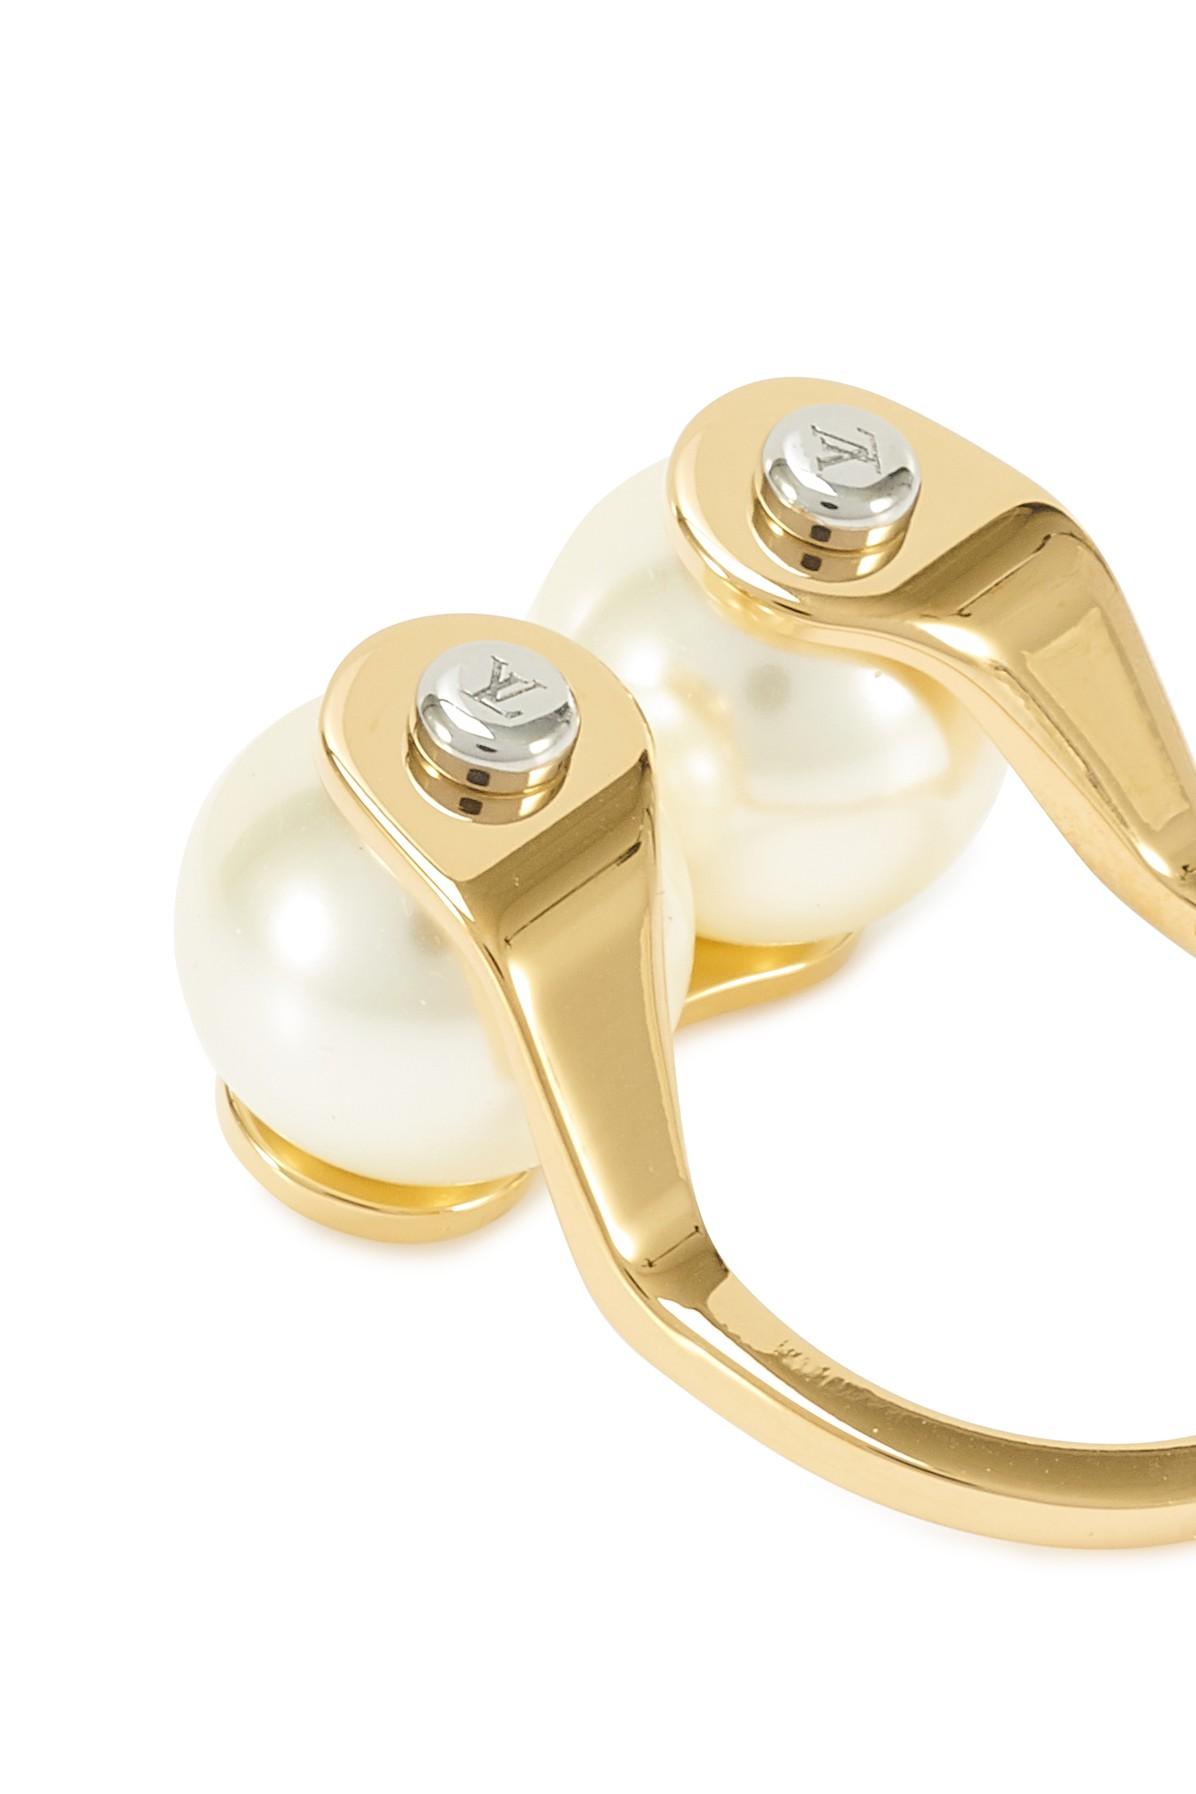 Louis Vuitton, Jewelry, Authentic Speedy Pearl Ring